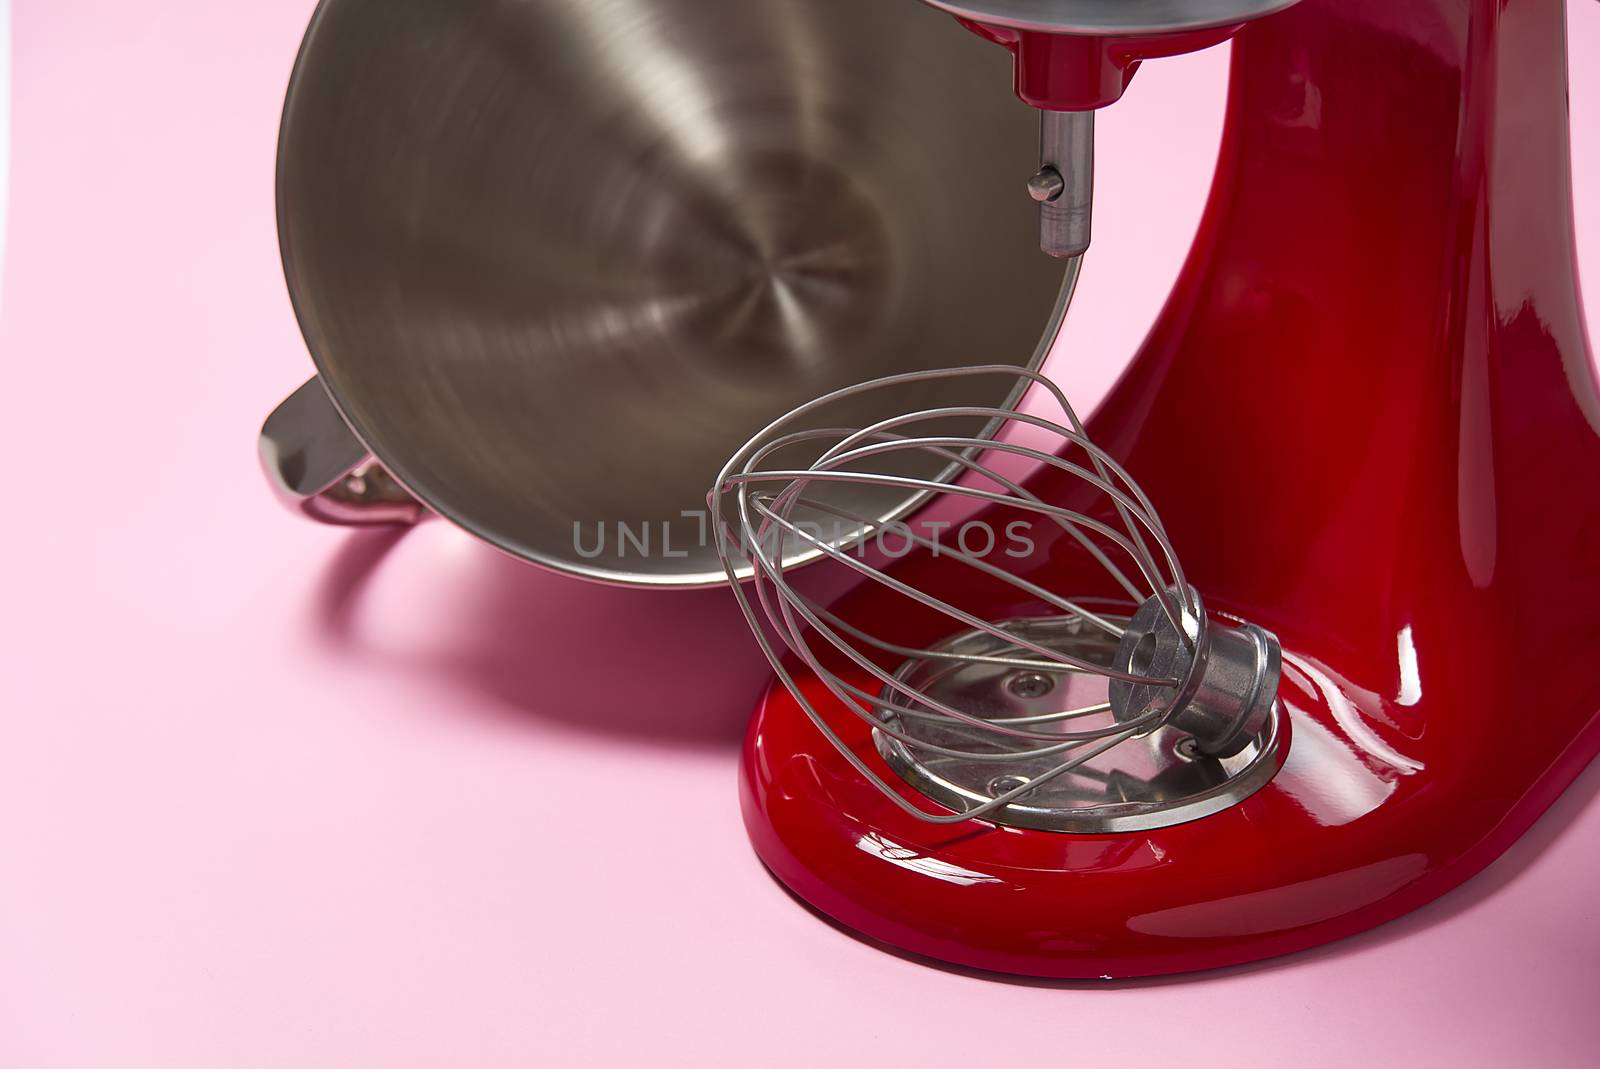 Stylish Red Kitchen Mixer With Clipping Path Isolated On pink Background. Professional steel electric mixer with Metal Whisk by PhotoTime